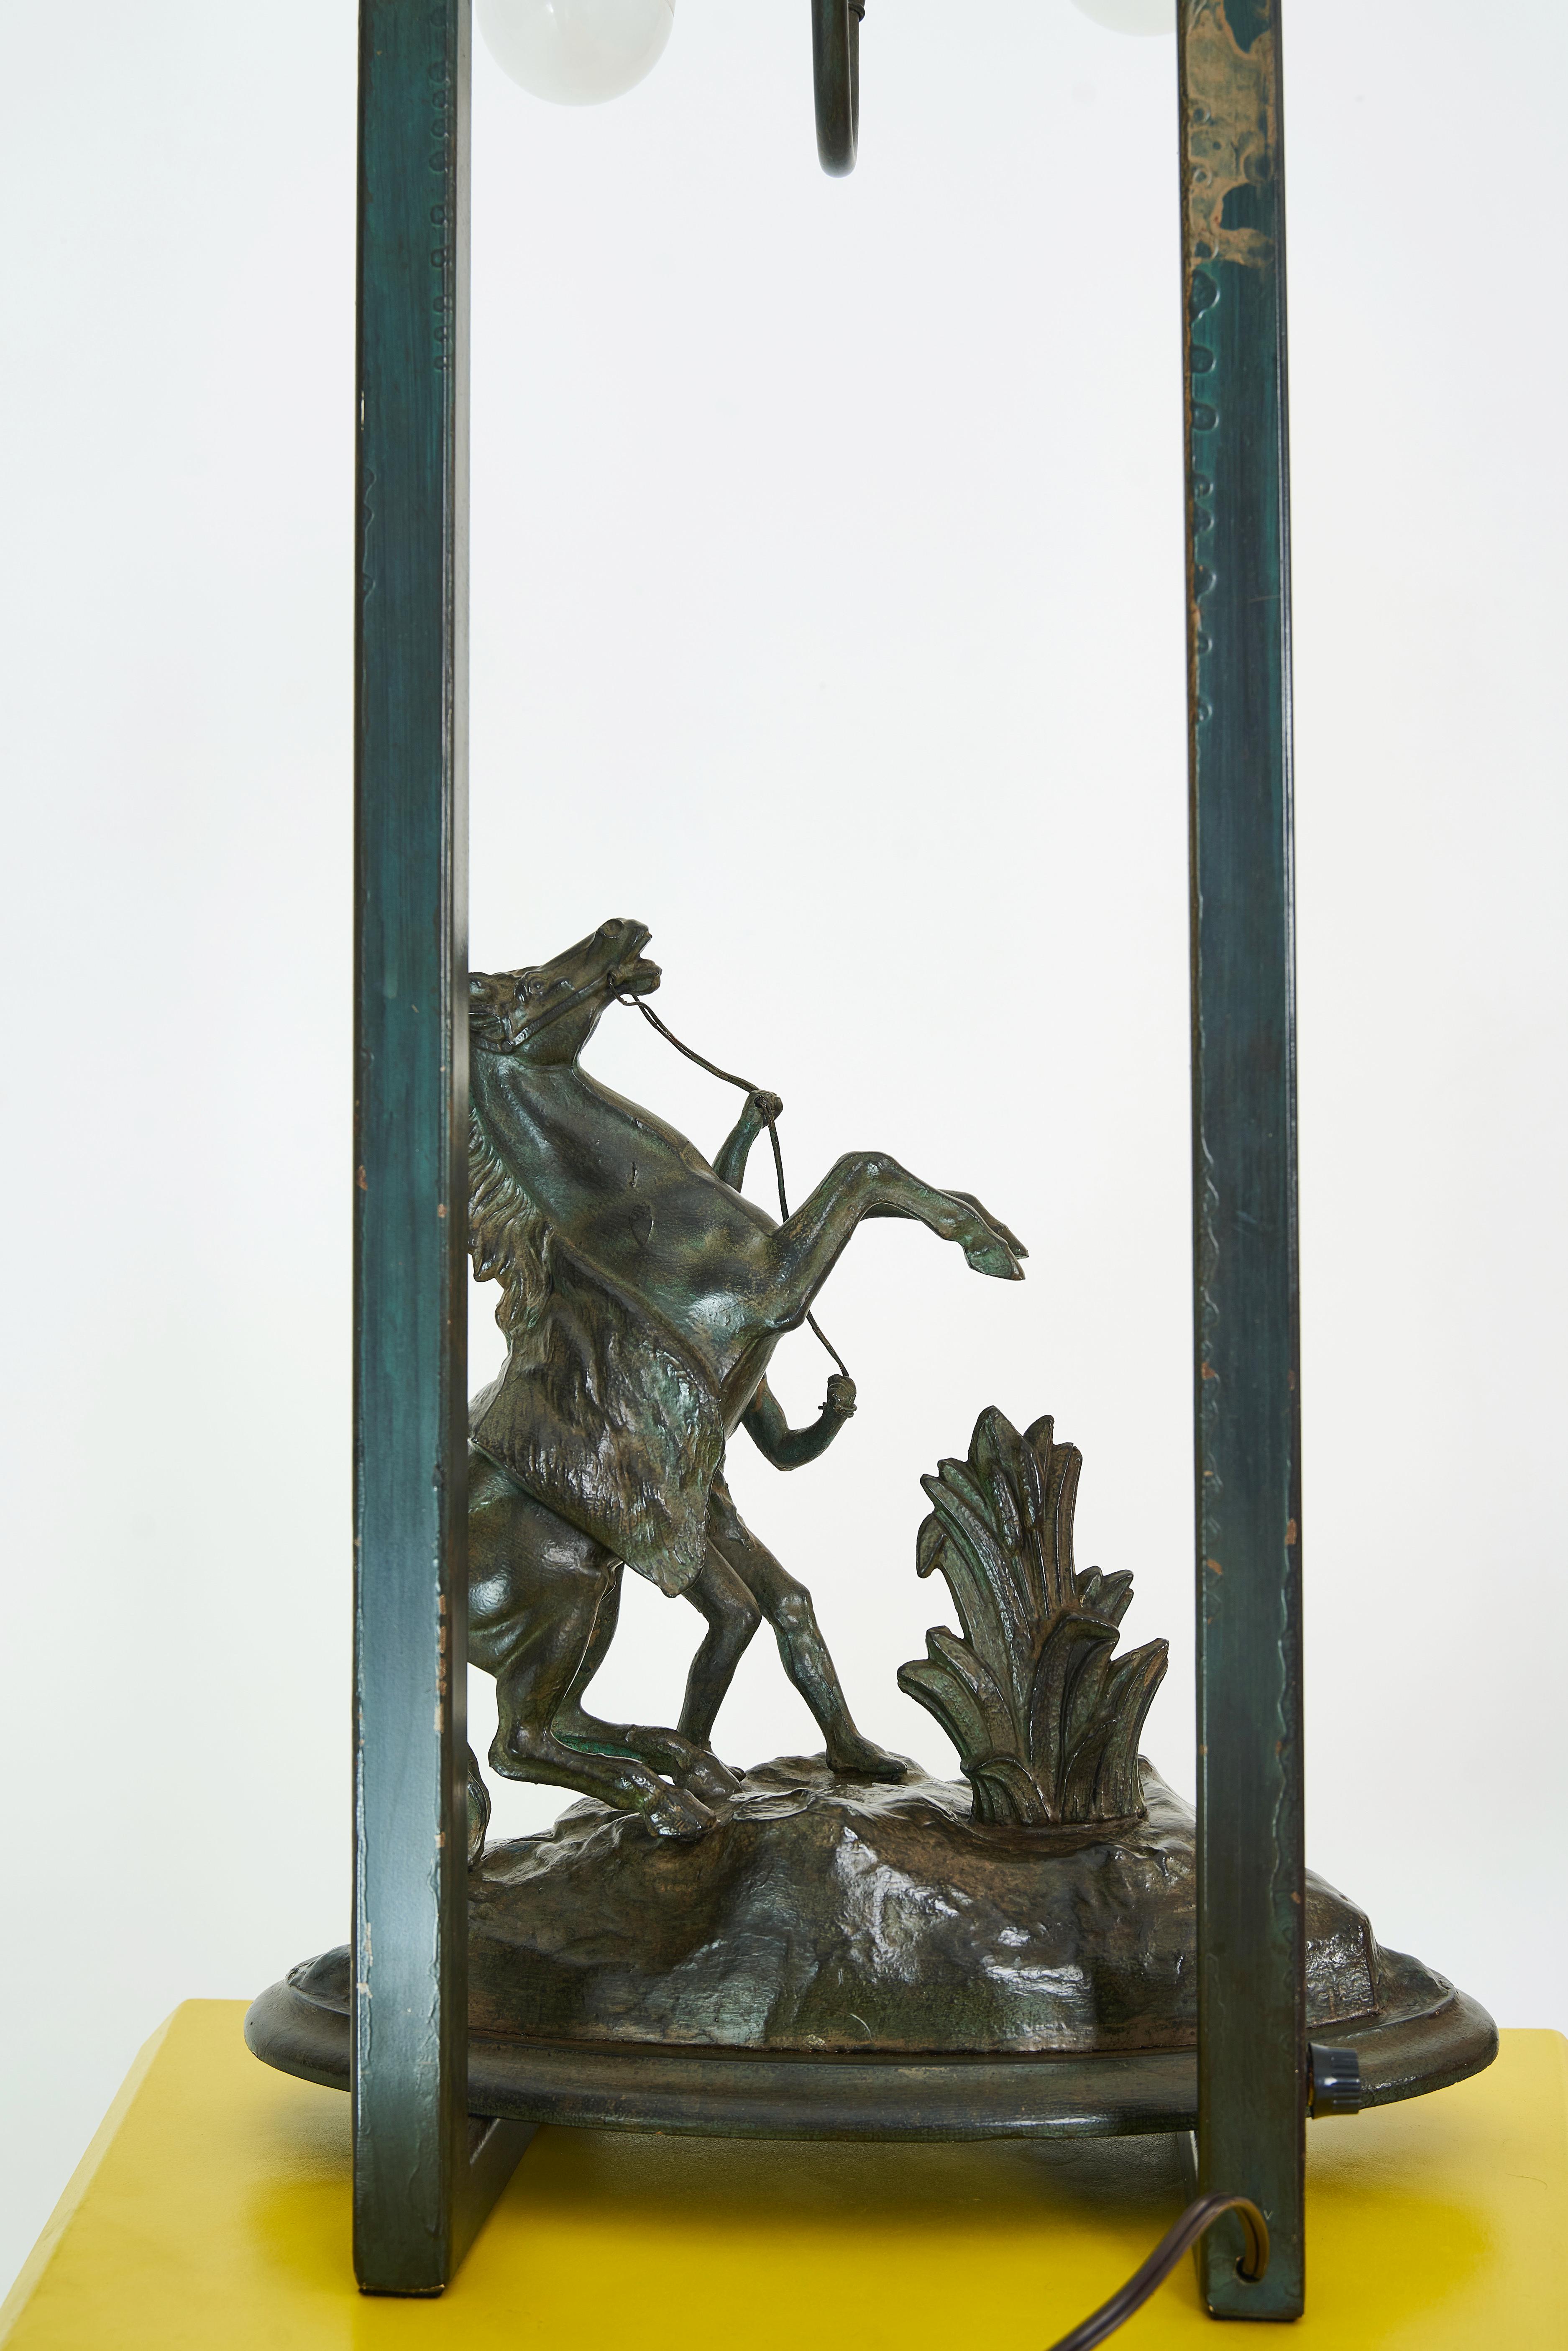 Metal An Armature Lamp featuring a Rearing Horse designed by William Haines